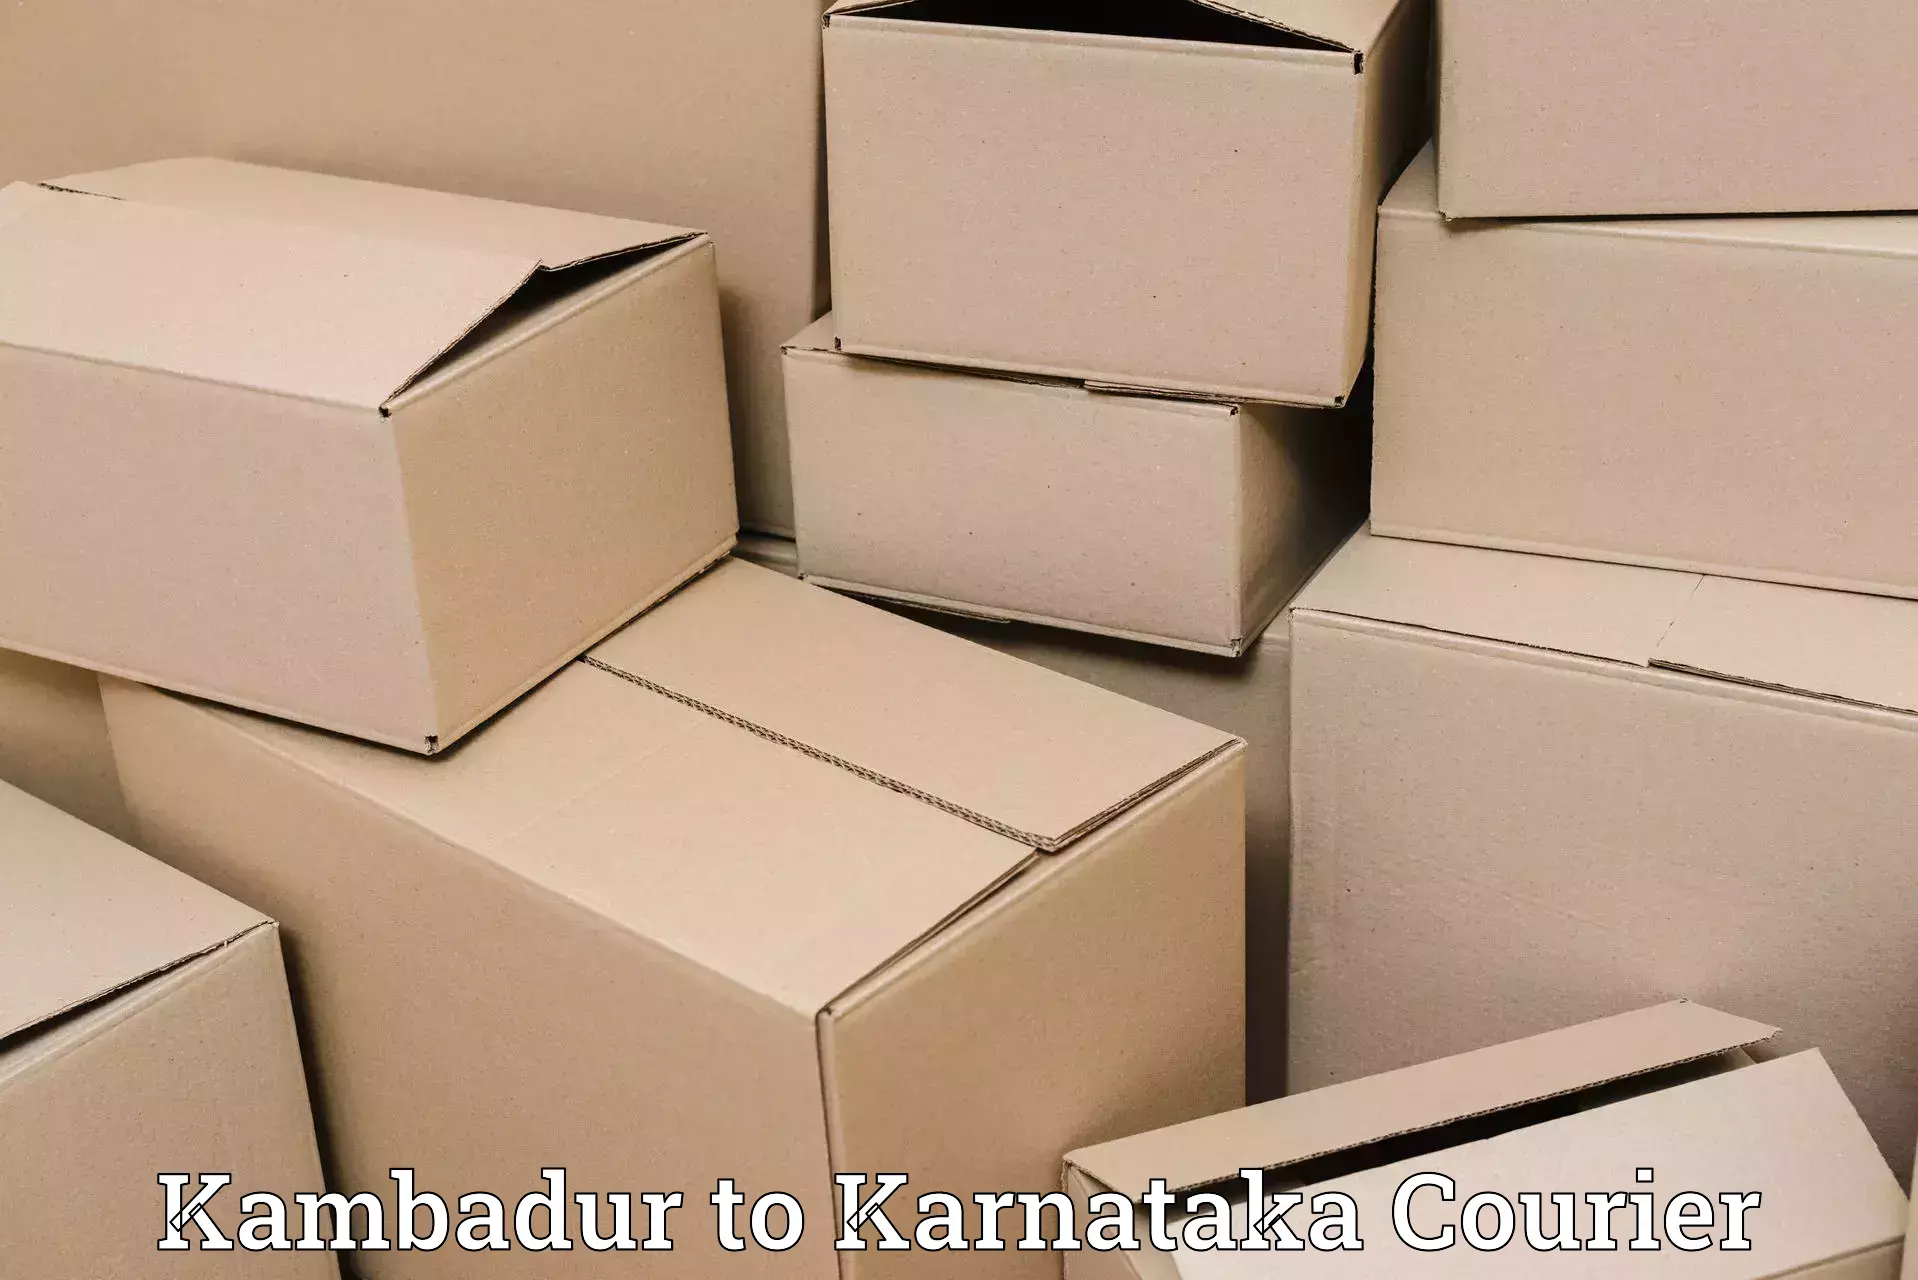 Easy access courier services Kambadur to Huliyar